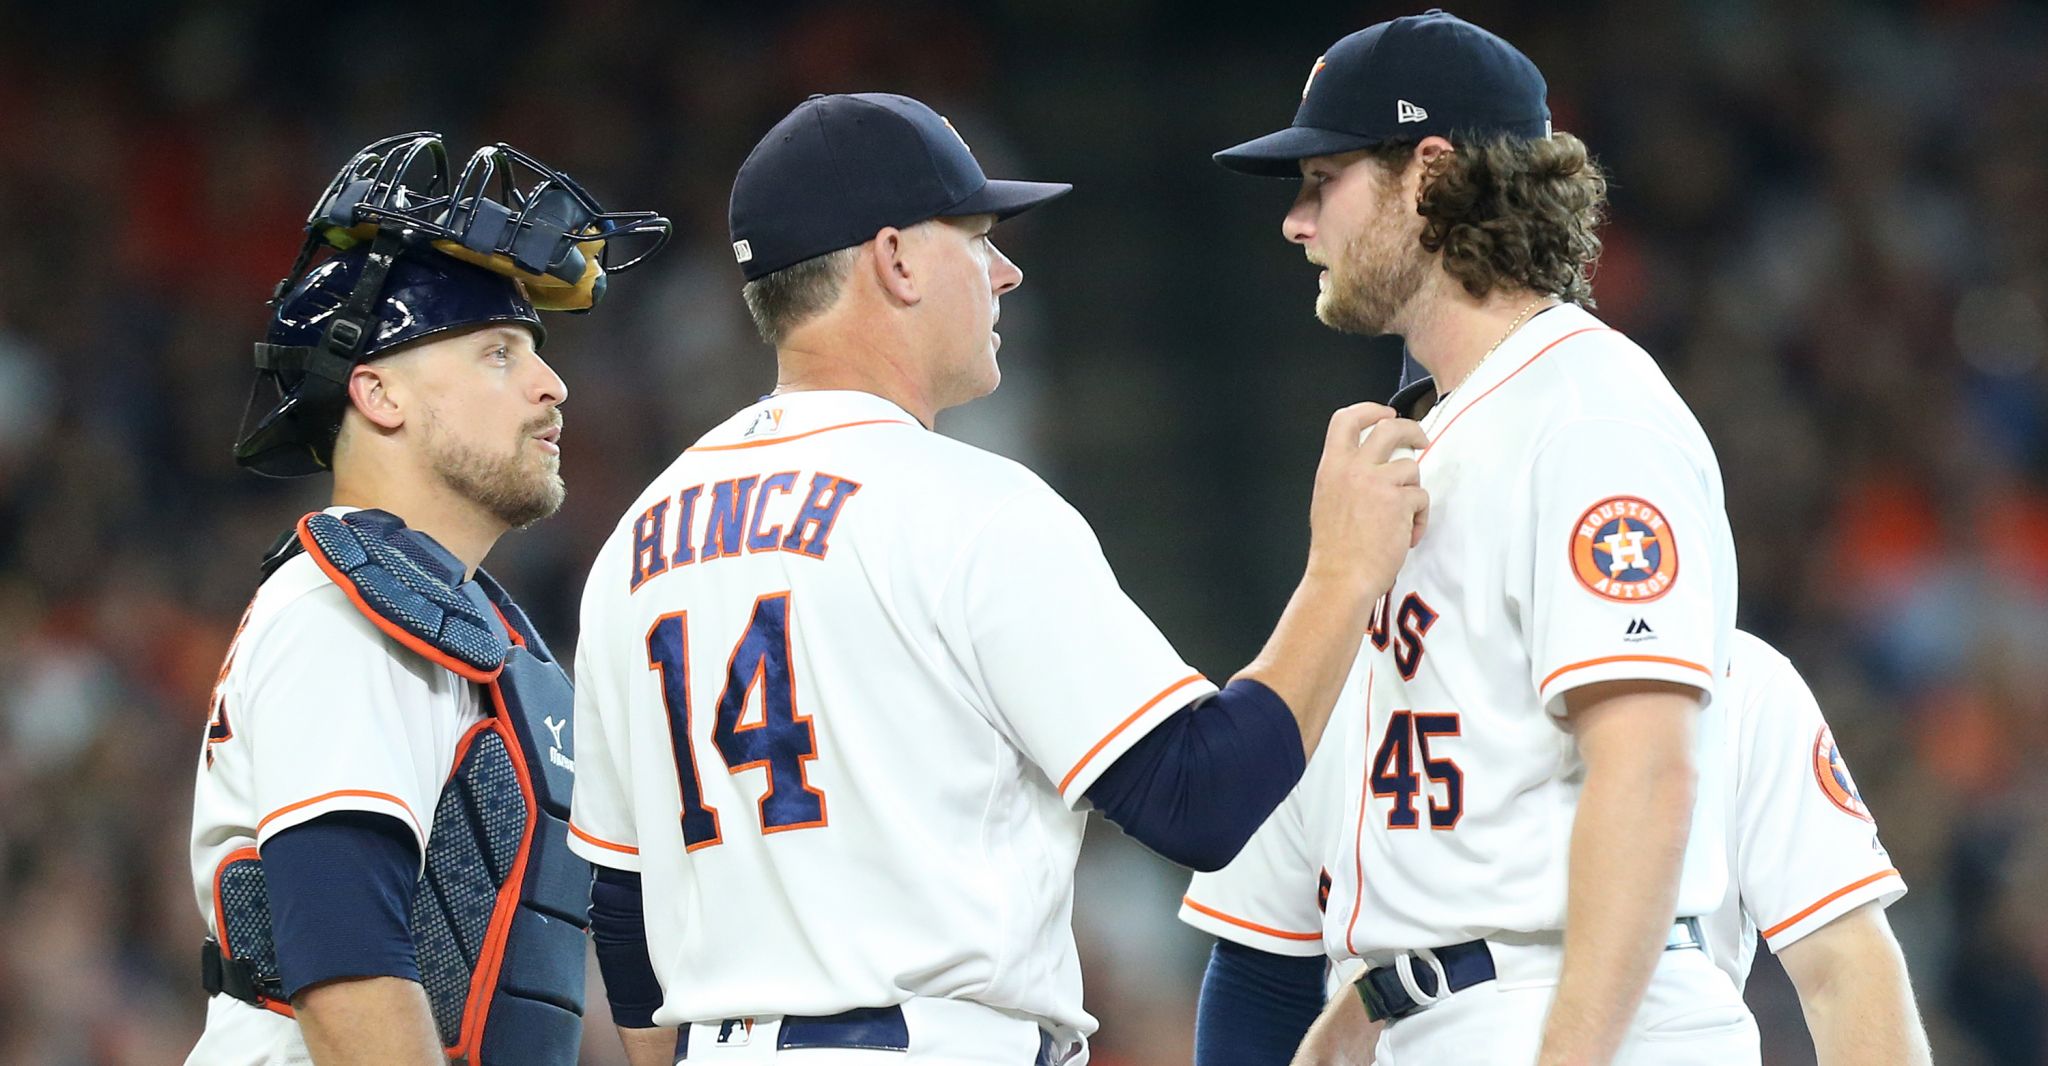 Gerrit Cole returns to carry Astros past Tigers - Houston Chronicle